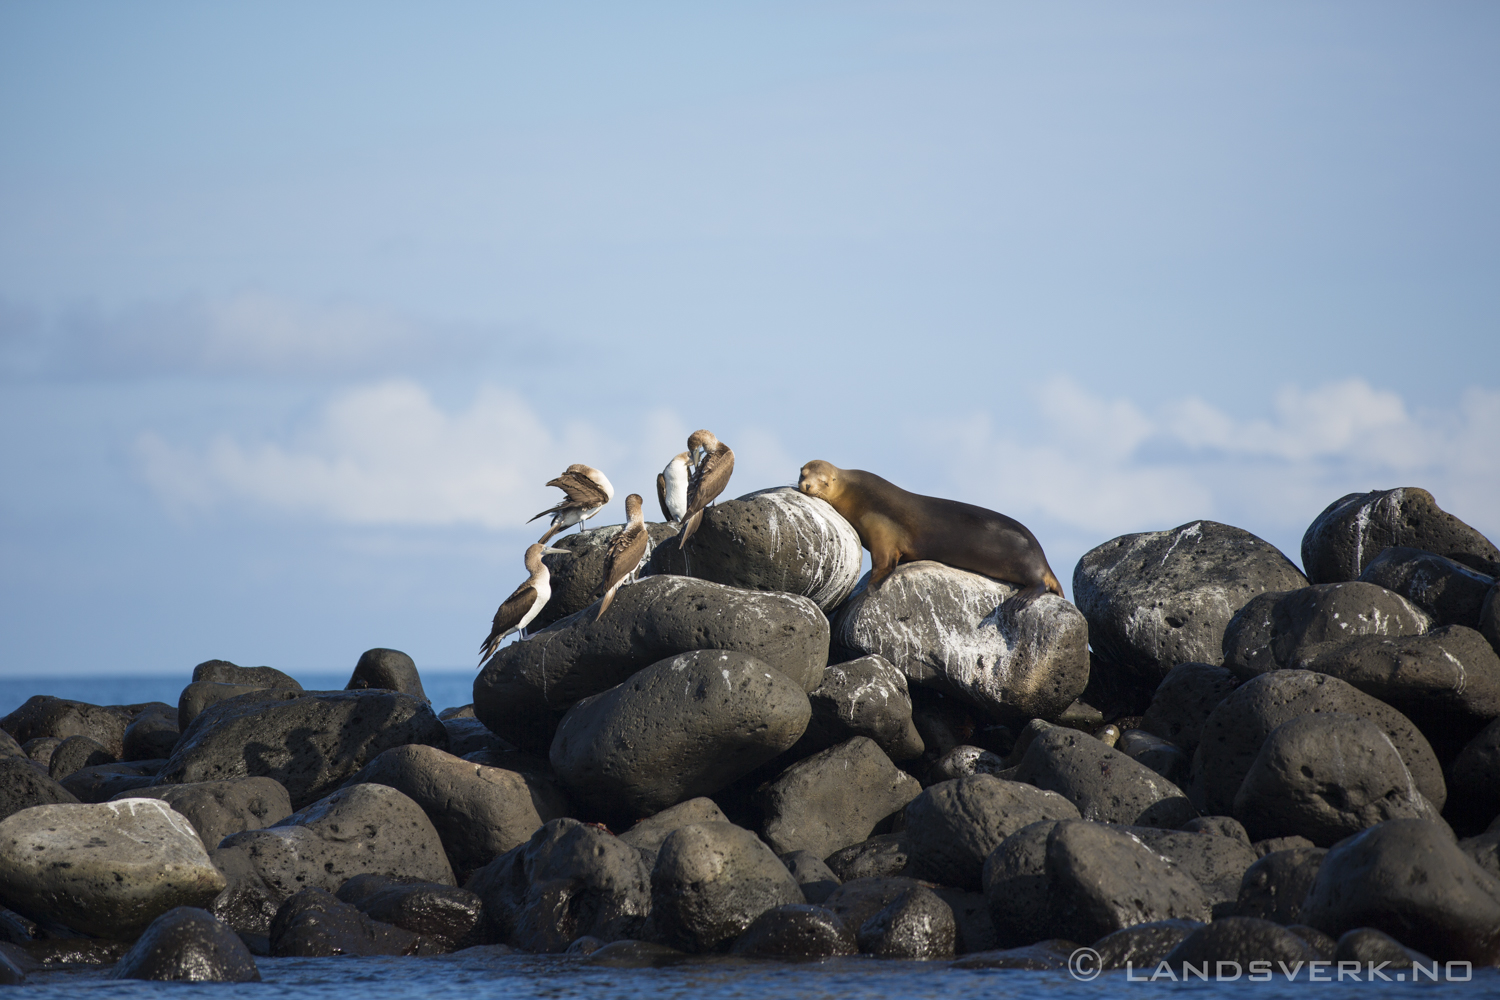 Wild Sea Lion and some Blue Footed Boobies (yeees yes funny name), Isla Lobos, San Cristobal, Galapagos. 

(Canon EOS 5D Mark III / Canon EF 70-200mm f/2.8 L IS II USM)